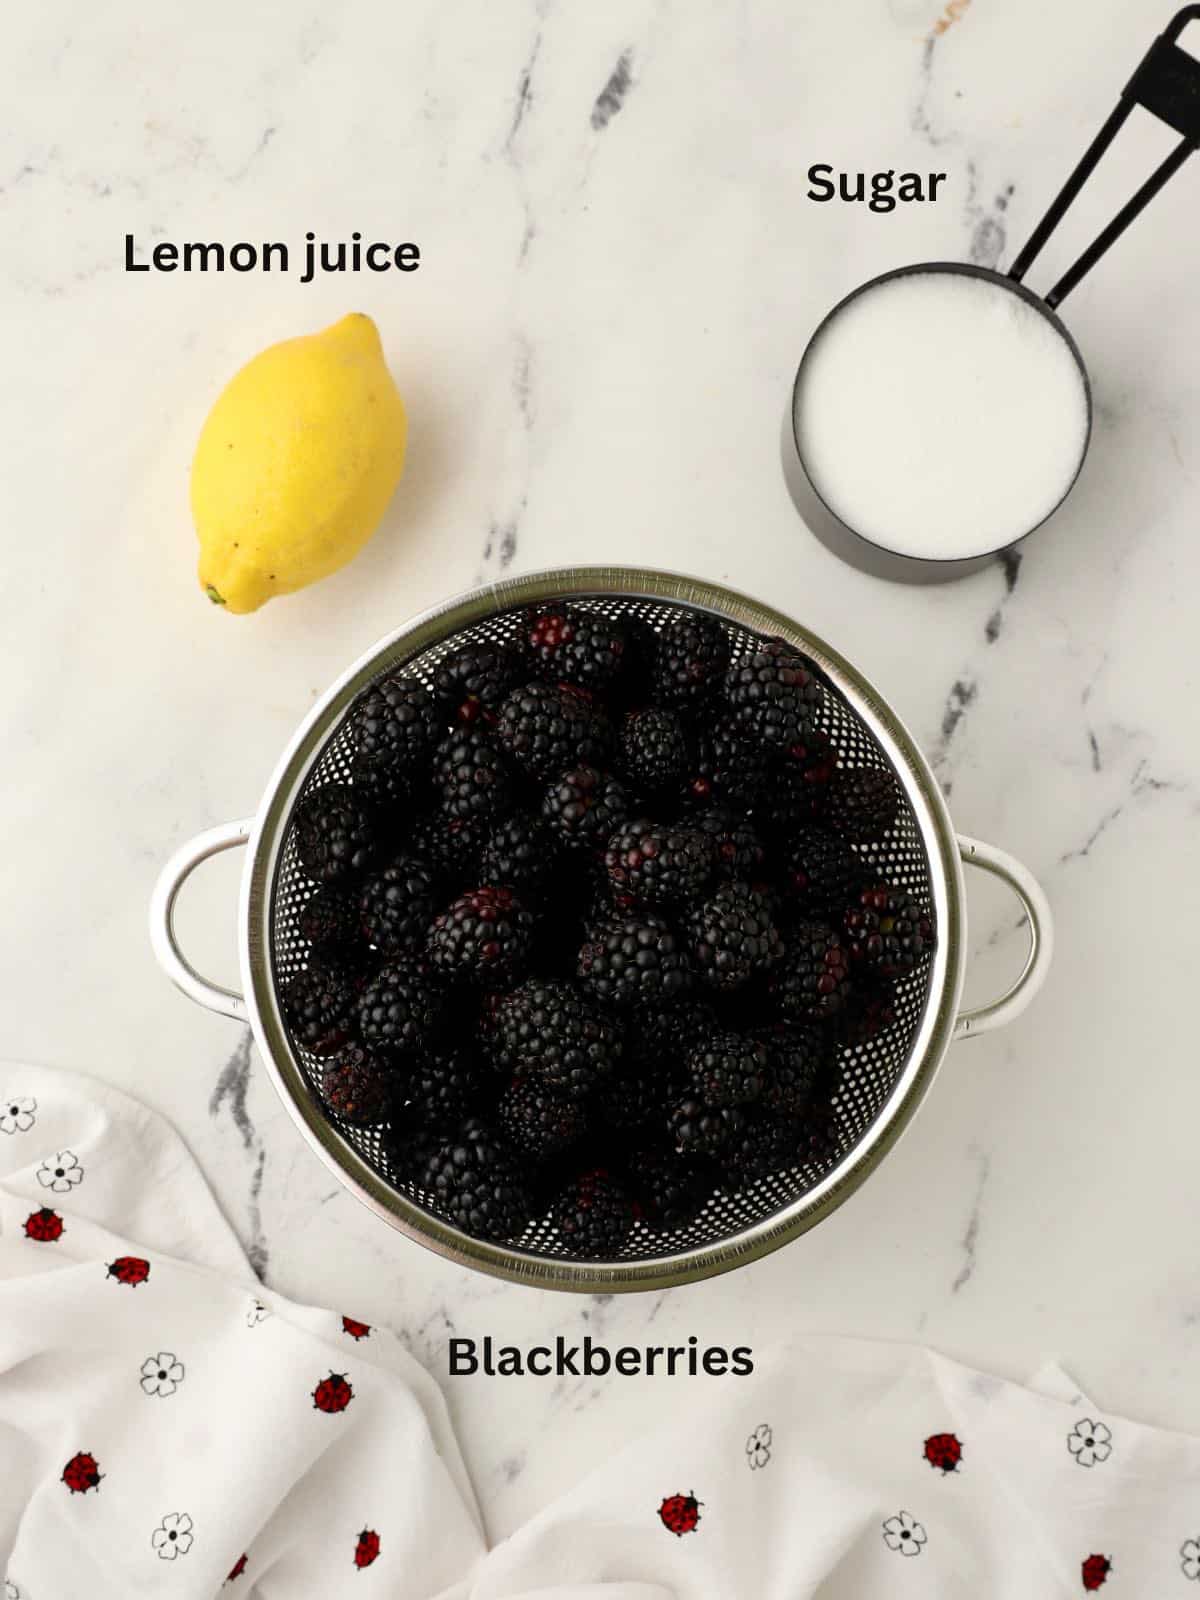 A colander full of blackberries, a measuring cup of sugar and a lemon.